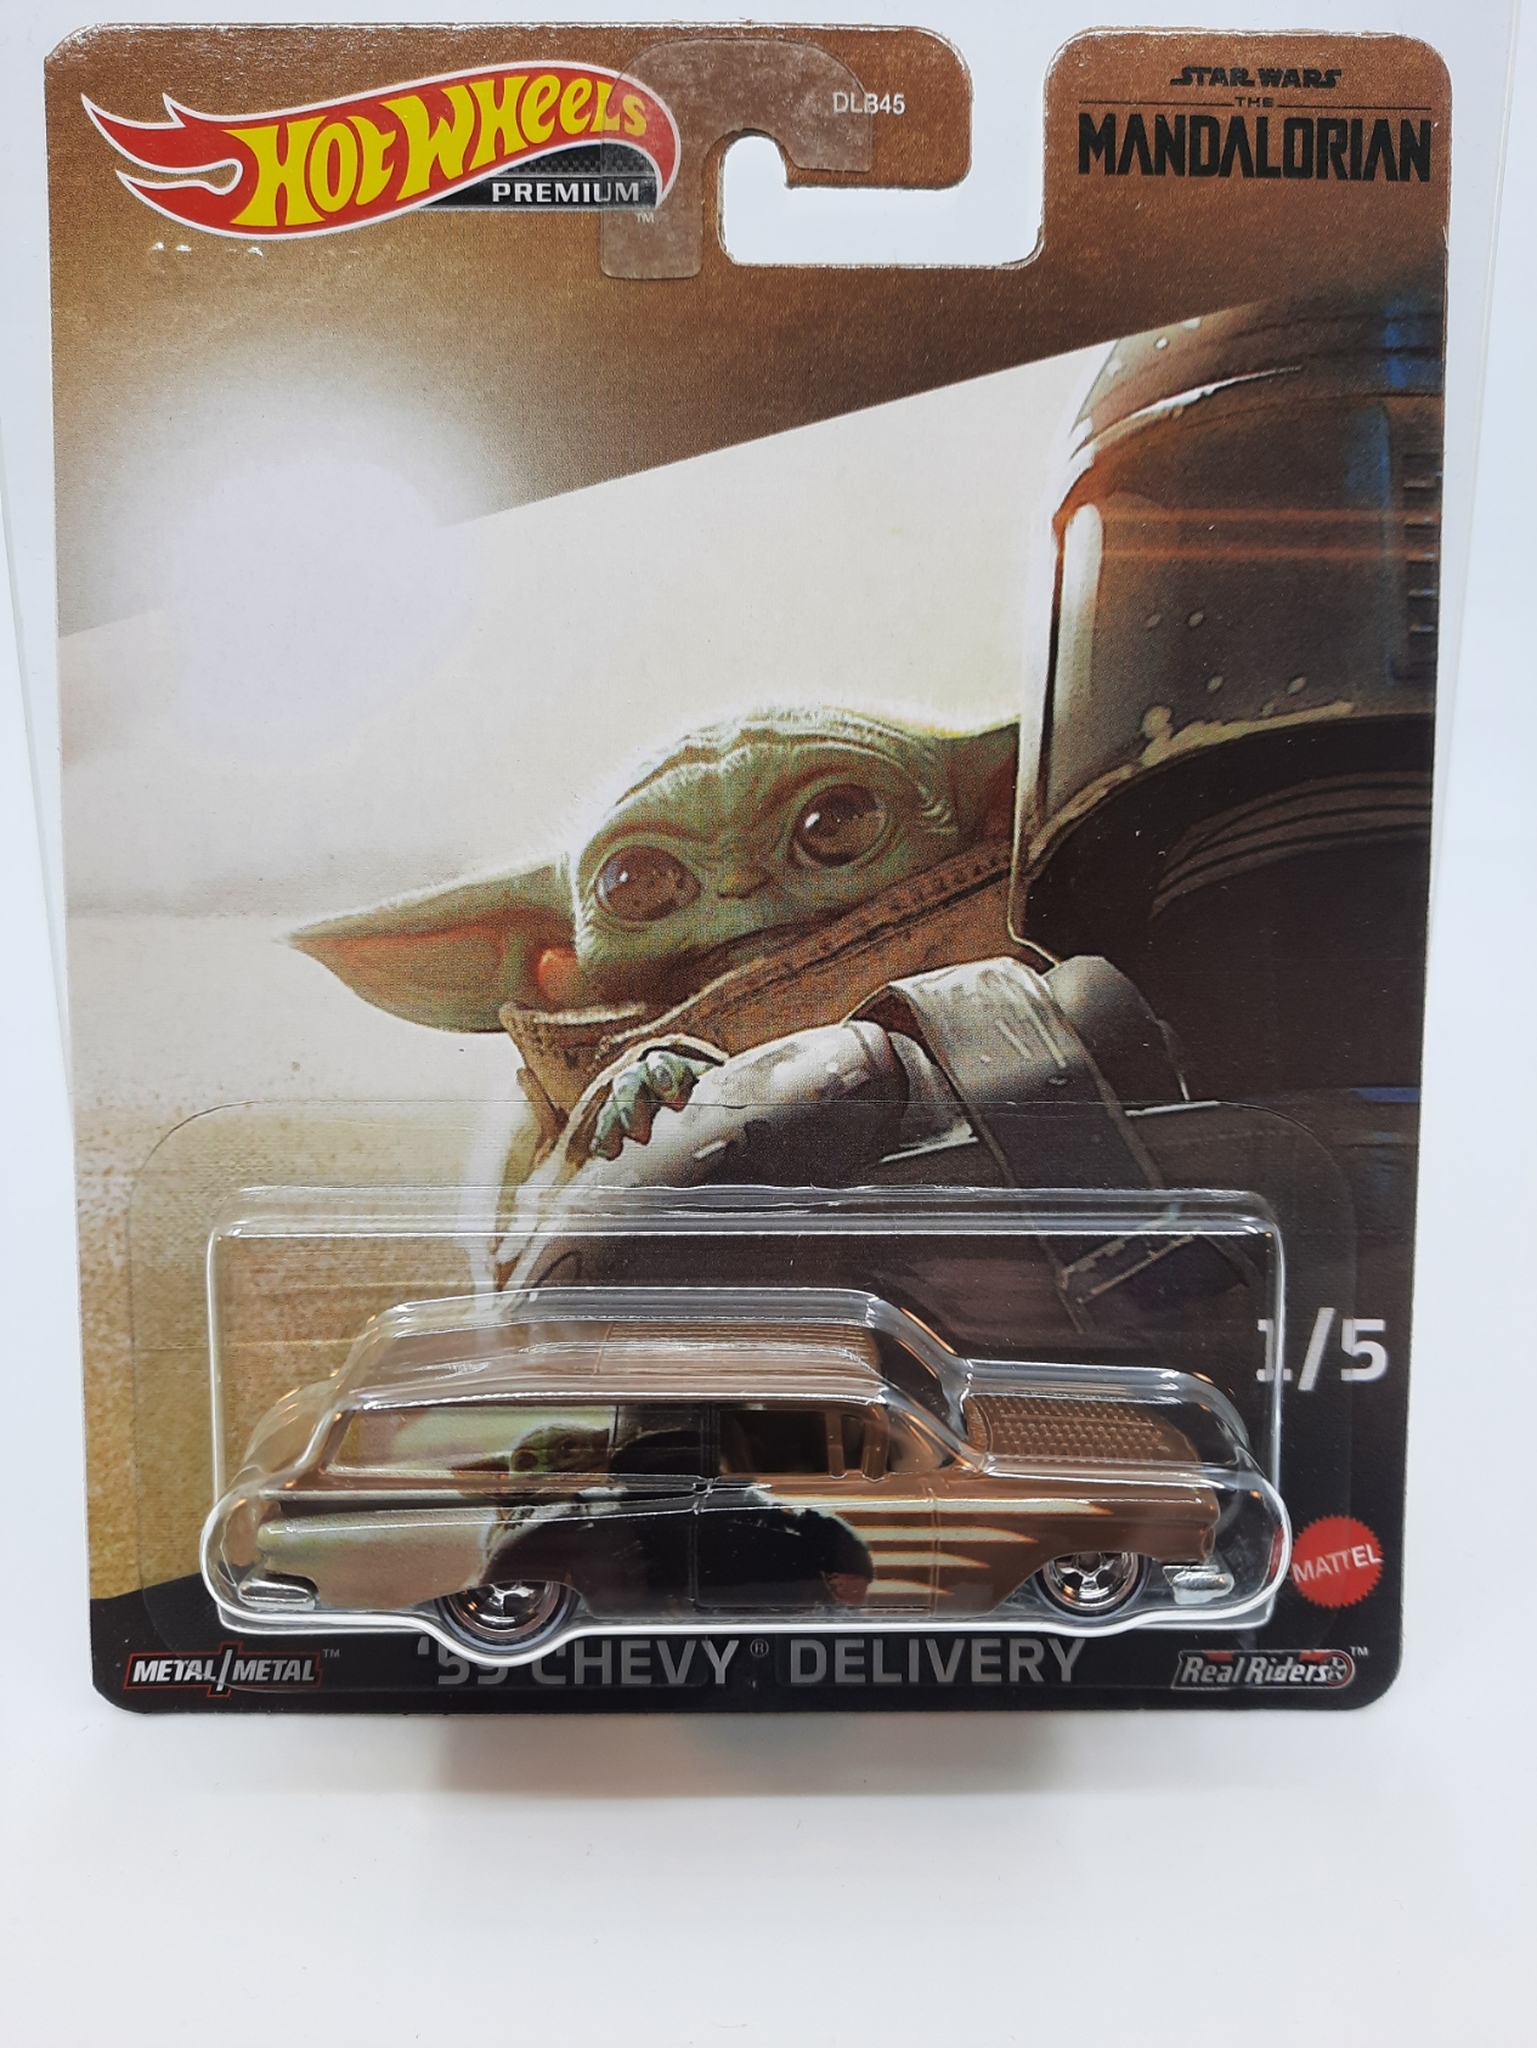 Hot Wheels premium Star Wars #1/5 Chevy Delivery 1959